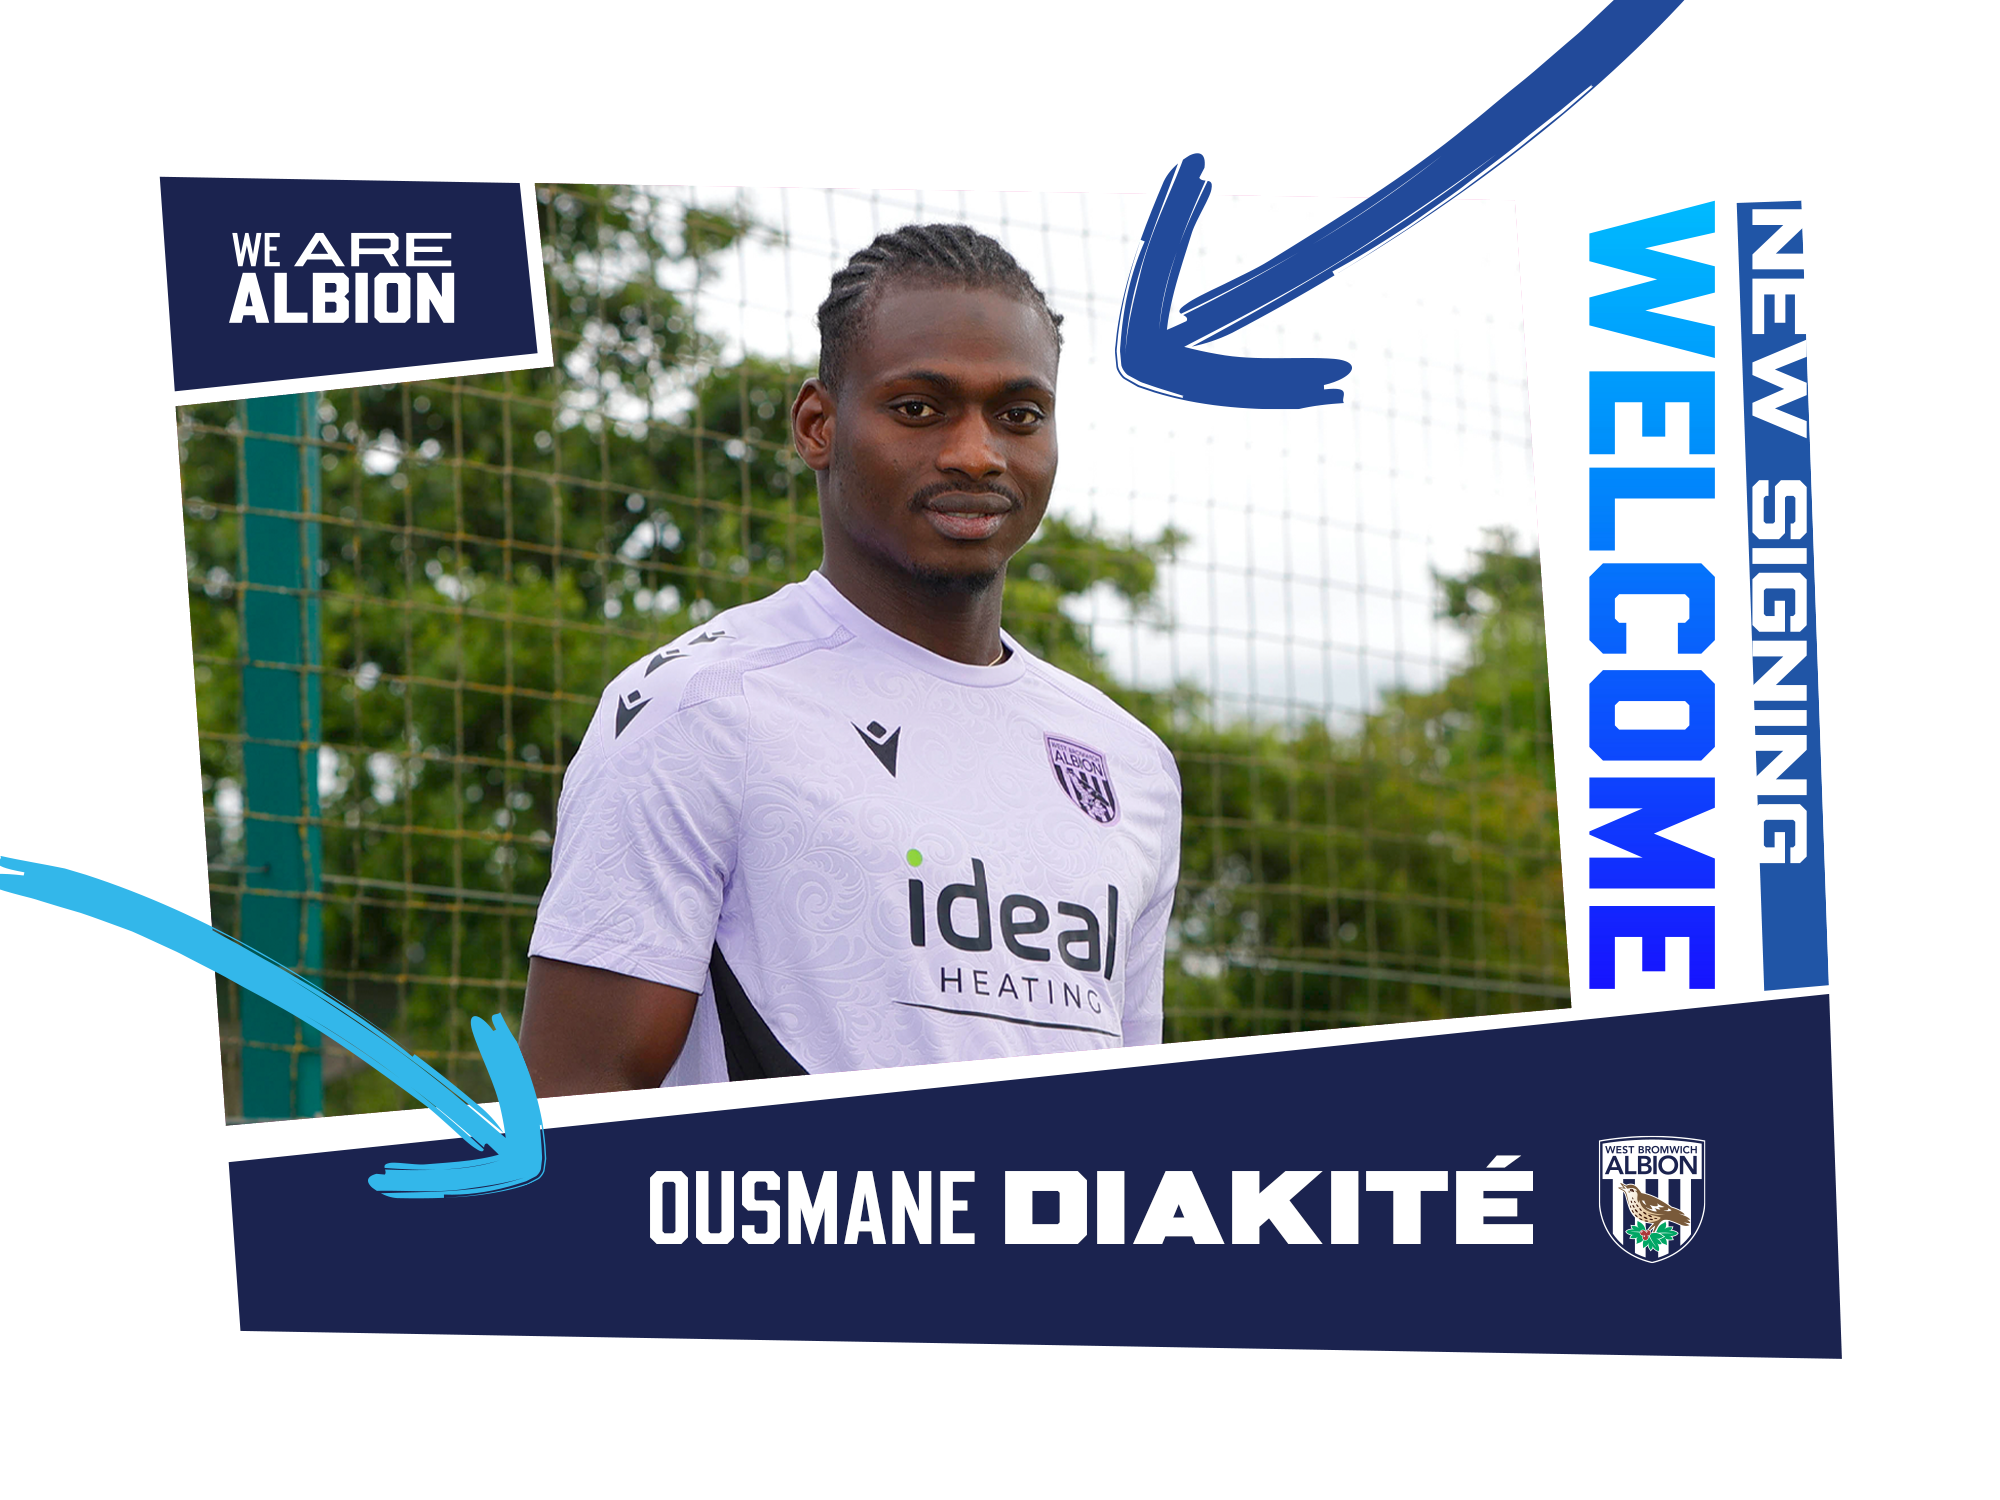 Ousmane Diakité's new signing graphic with an image of him smiling at the camera